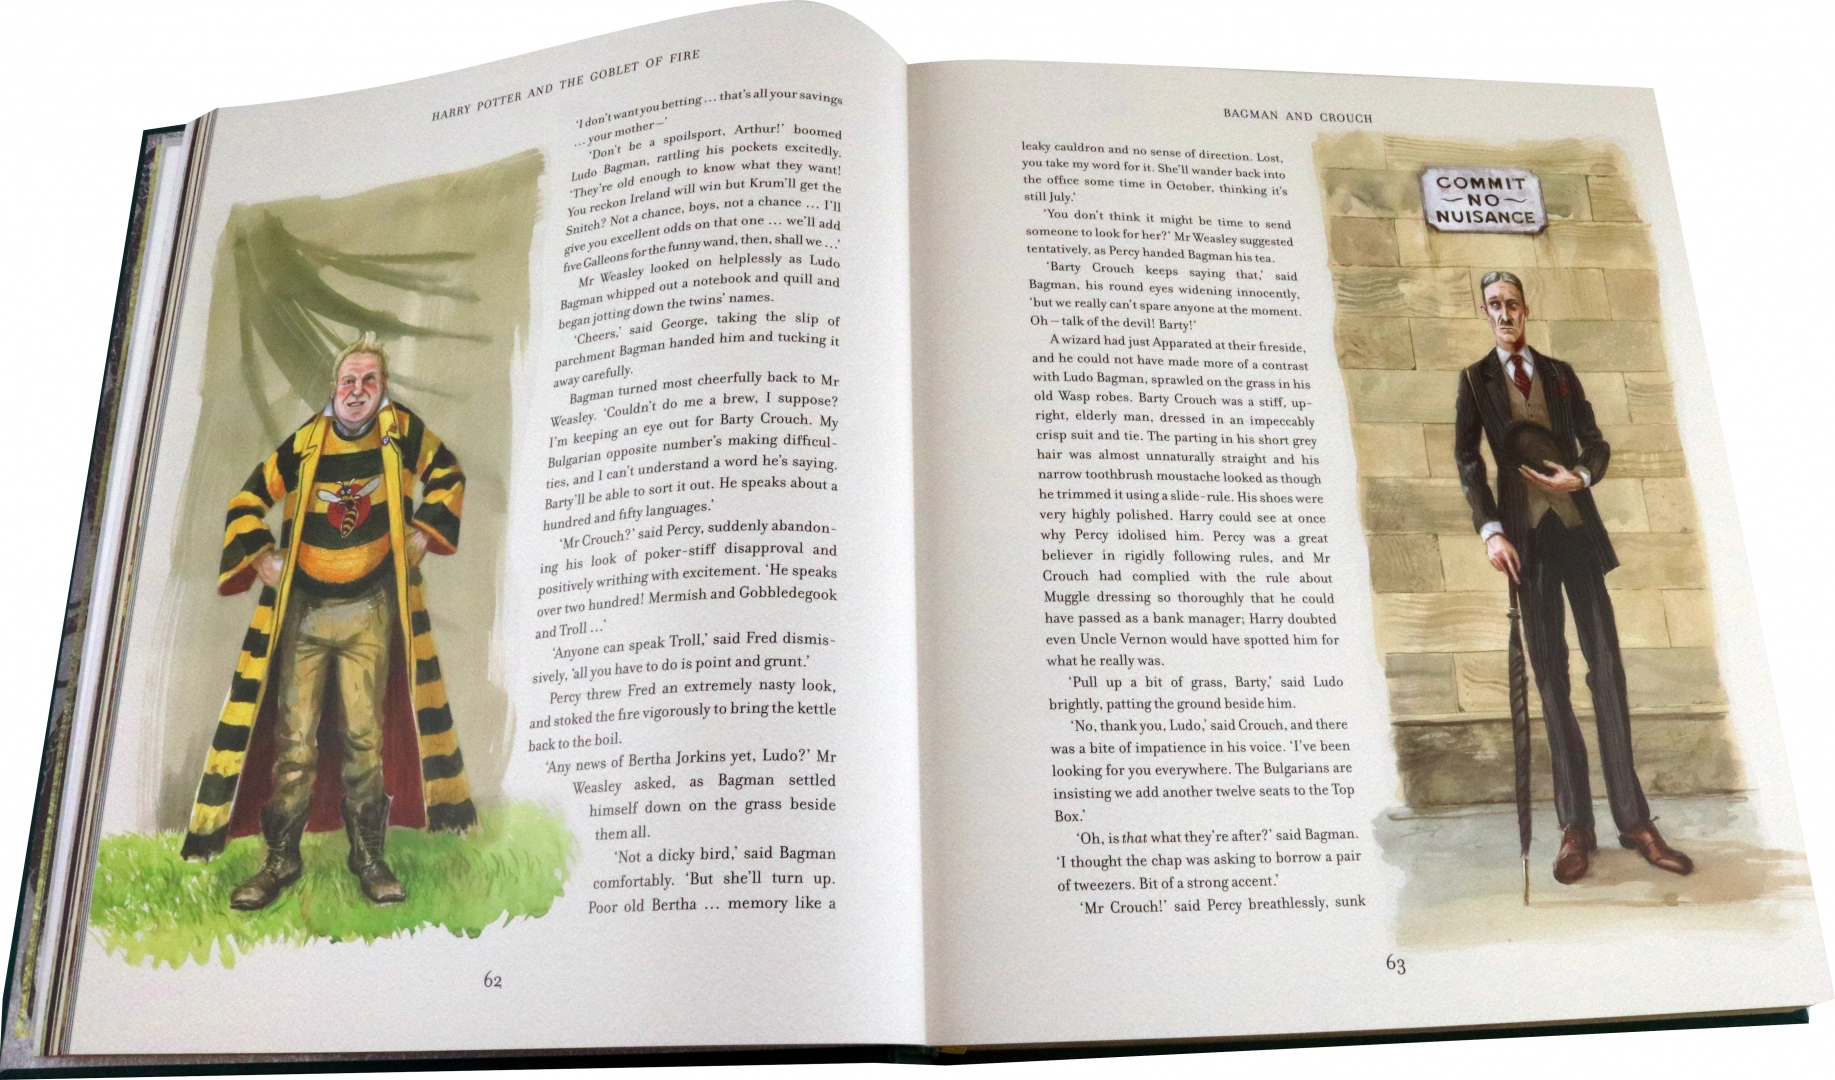 Joanne Rowling: Harry Potter and the Goblet of Fire. Deluxe Illustrated Slipcase Edition